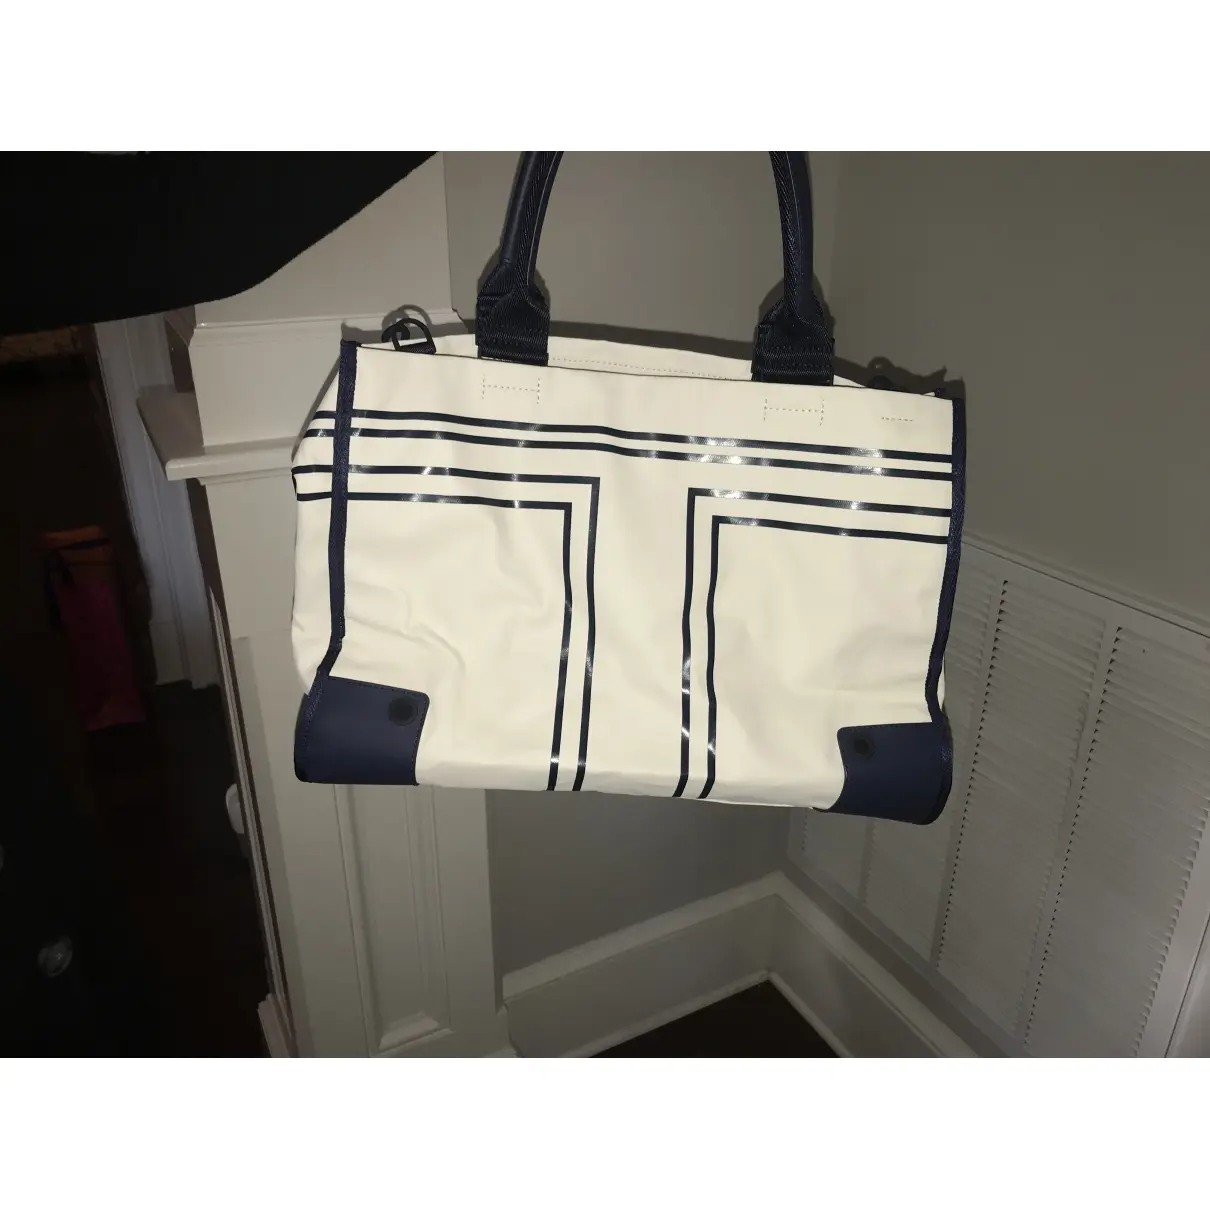 Tory Burch Travel bag for sale